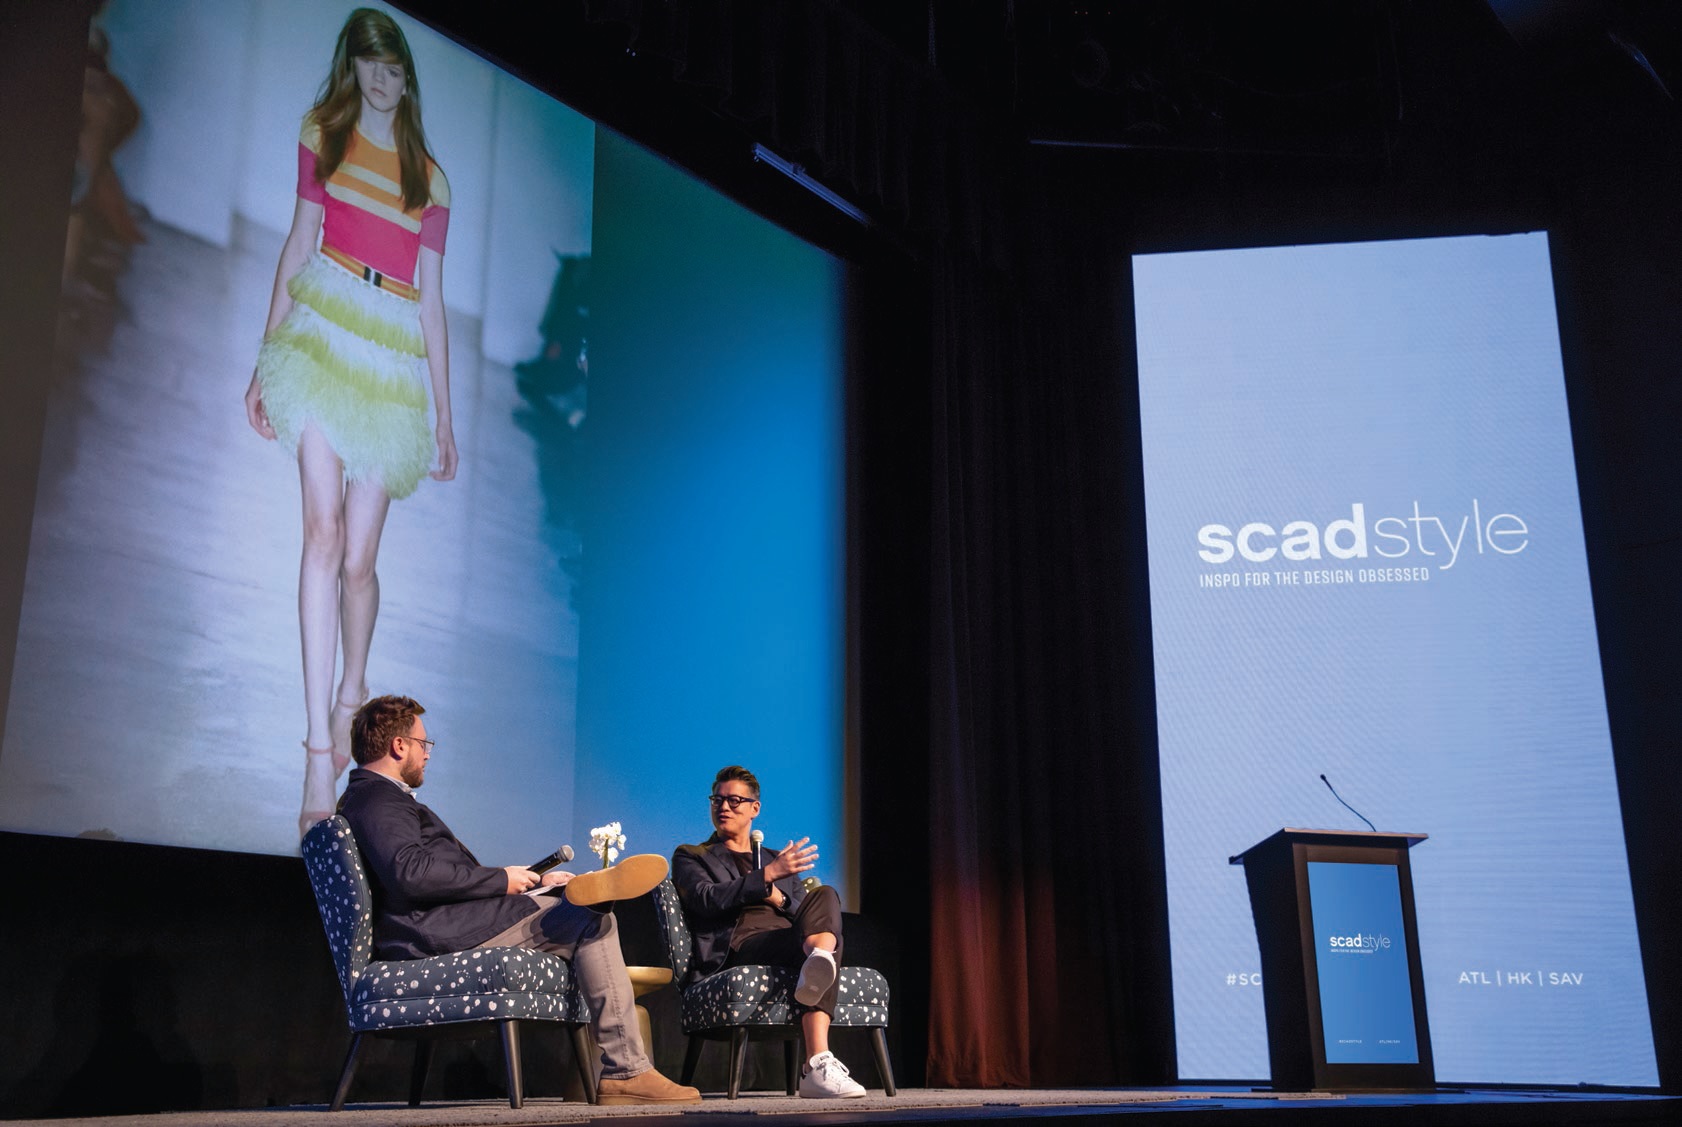 Former InStyle editor-in-chief and journalist Ariel Foxman and designer Peter Som discussing a modern approach to fashion during SCADstyle’s 2019 event PHOTO COURTESY OF SCAD